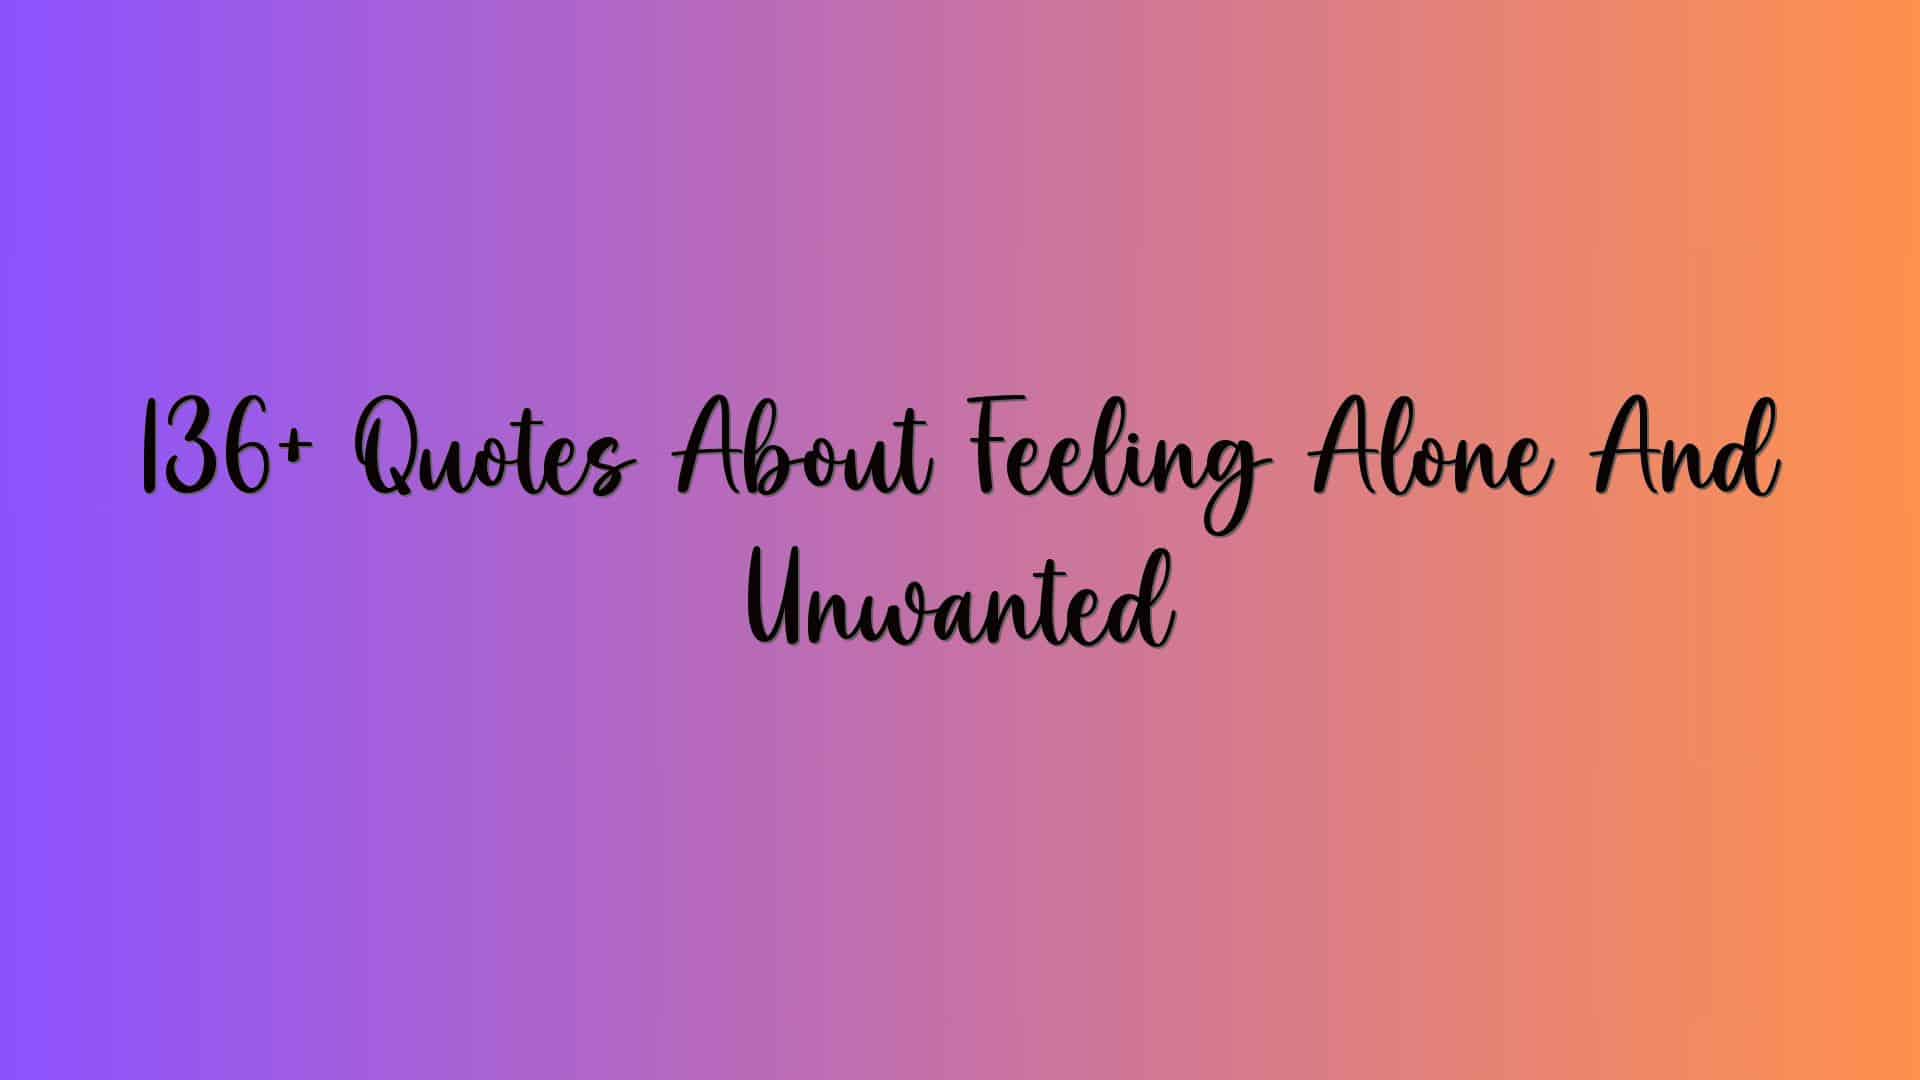 136+ Quotes About Feeling Alone And Unwanted